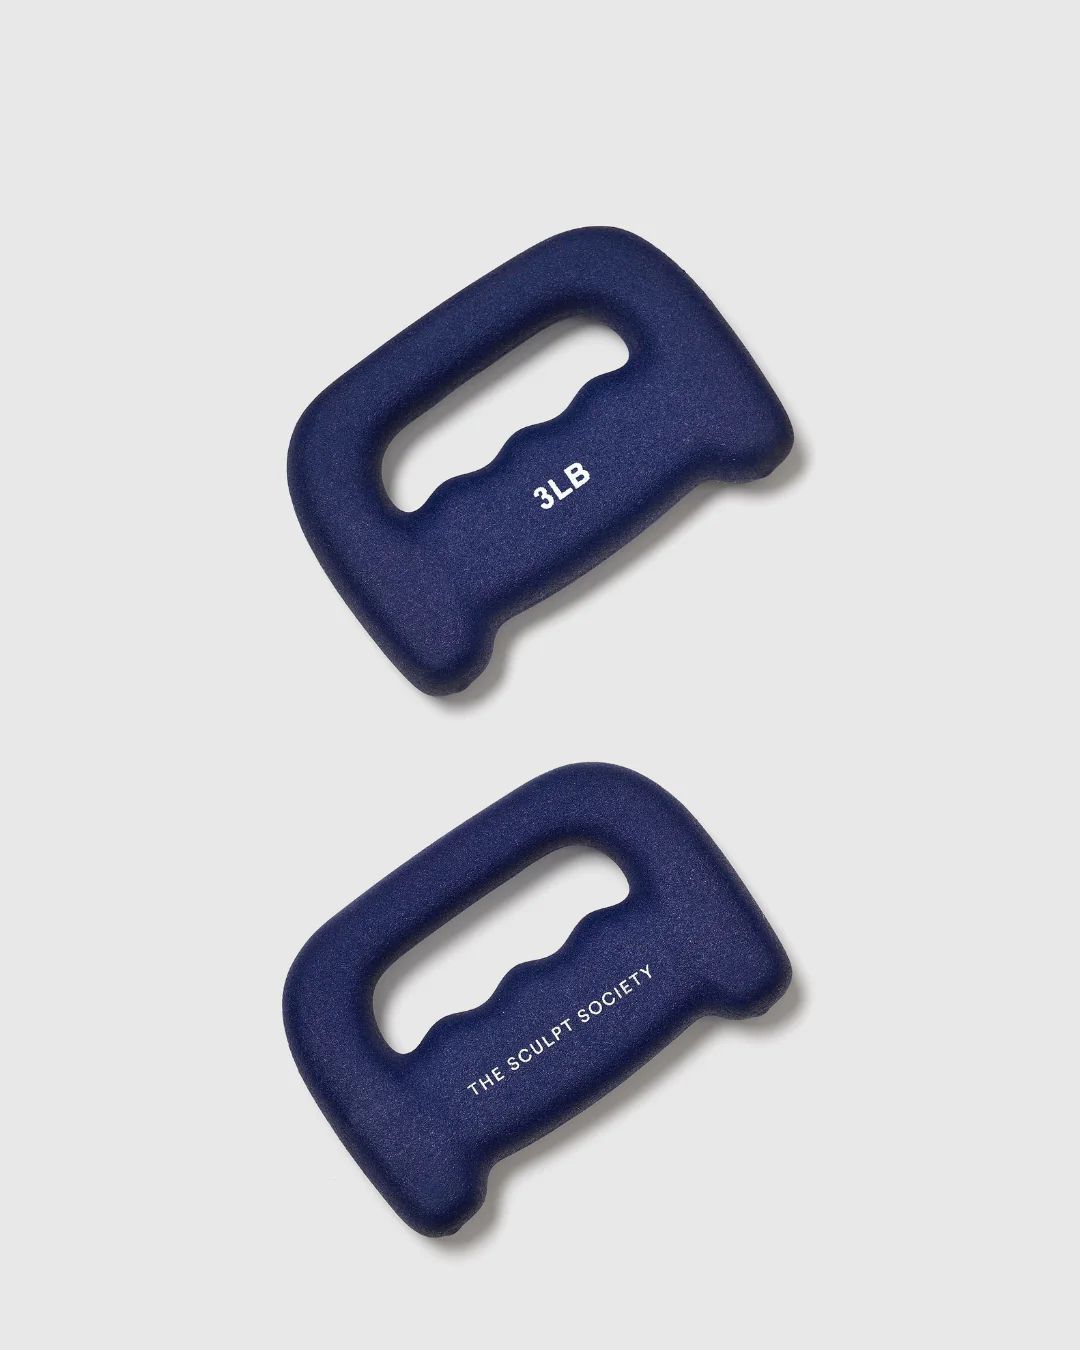 TSS 3 lb Weights (set of 2) | The Sculpt Society